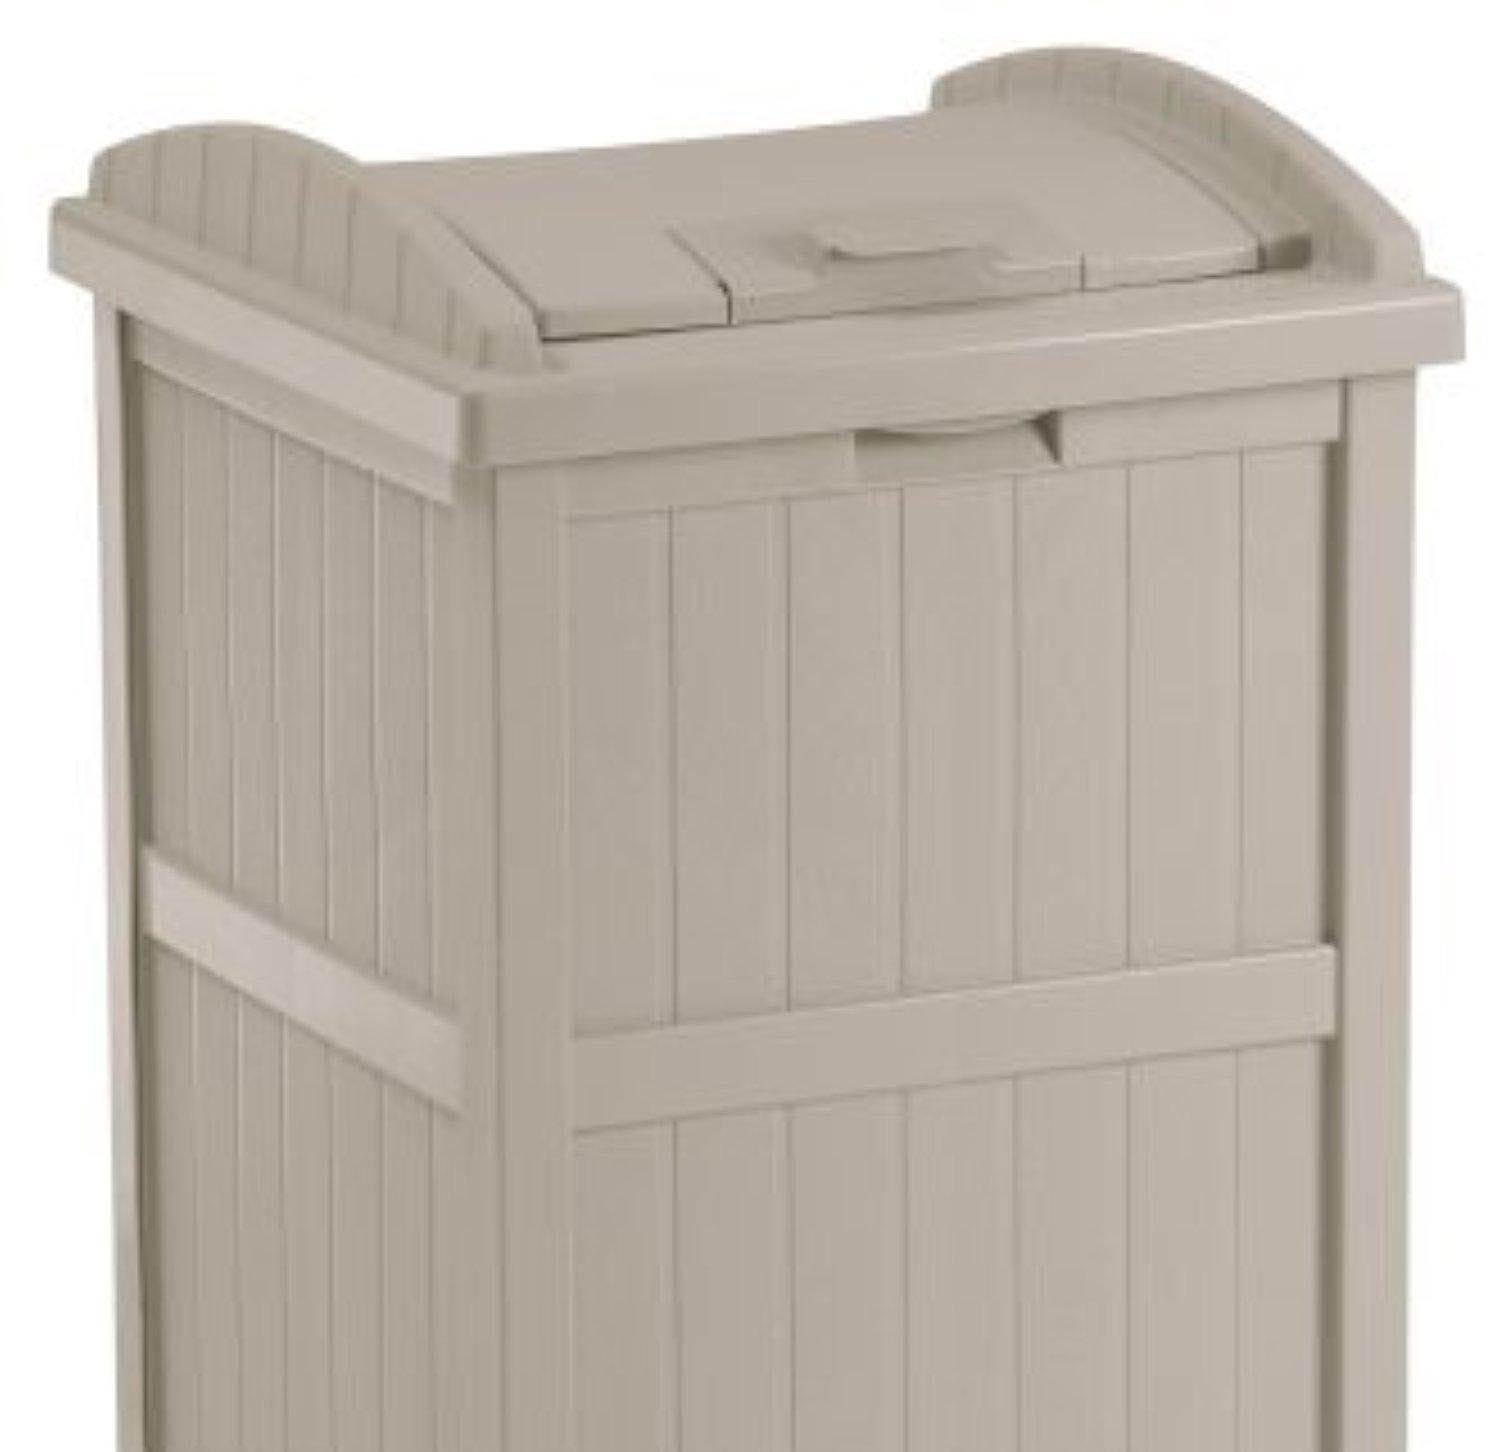 Suncast Trash Hideaway 33 Gallon Capacity Resin Outdoor Garbage Container, Taupe - image 5 of 5